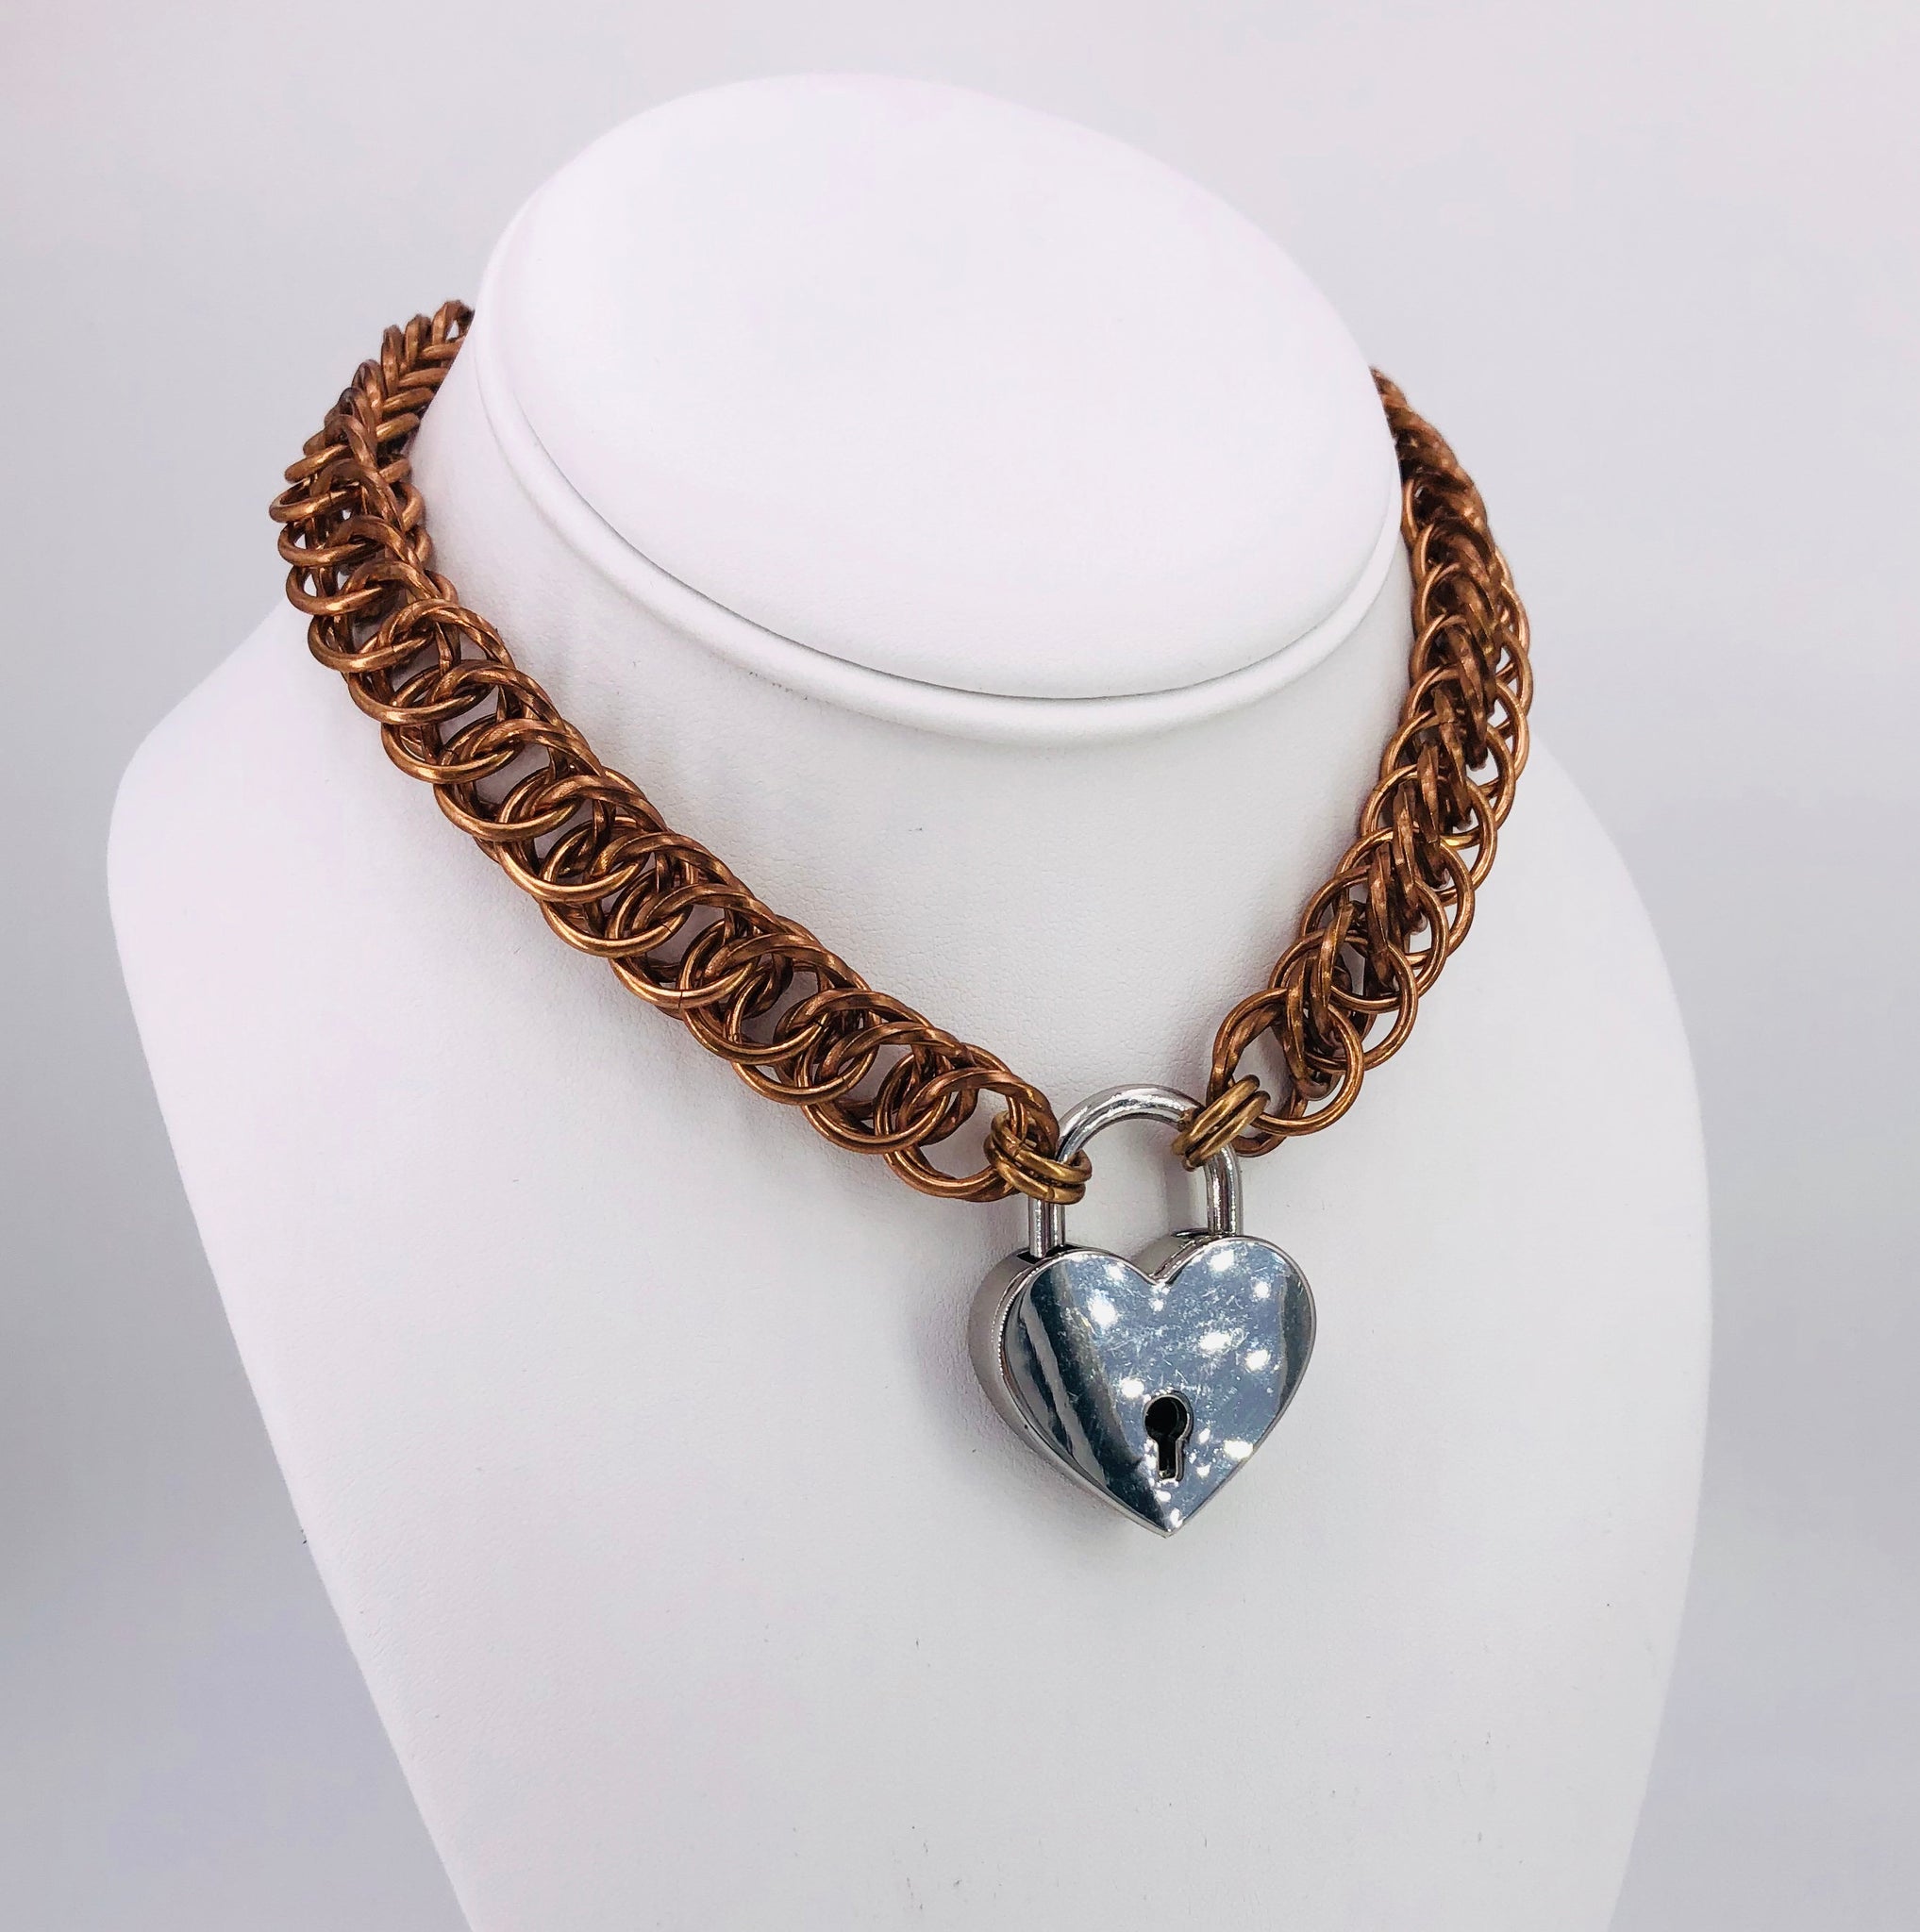 Bronze Statement Collar with Twisted Rings and Heart Lock (BDSM submissive)